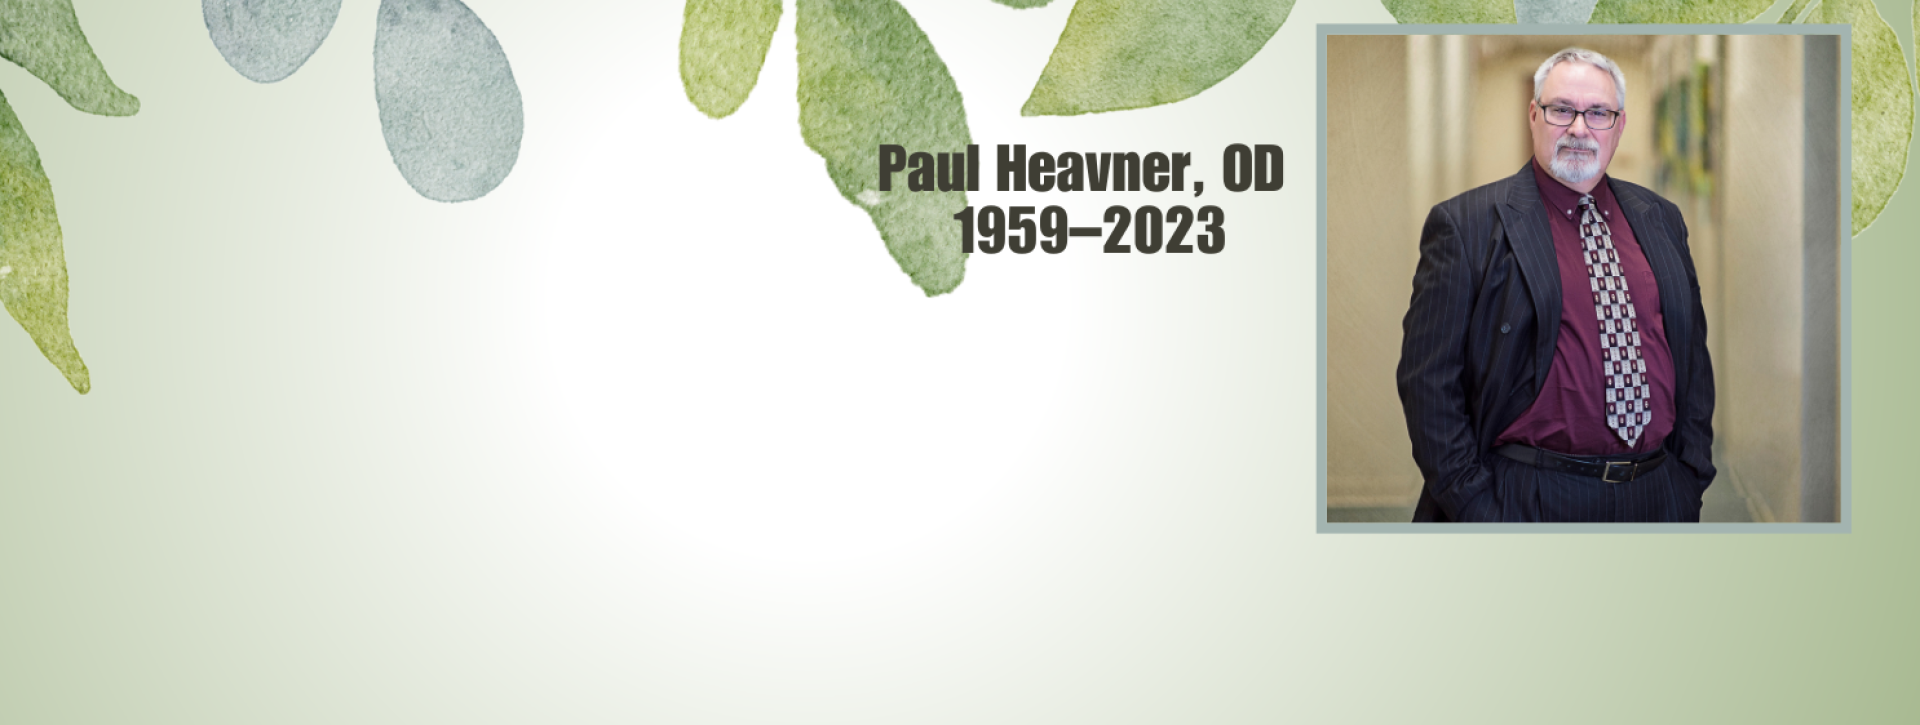 Light green background with leaves and Dr Heavners photo, name and 1959-2023